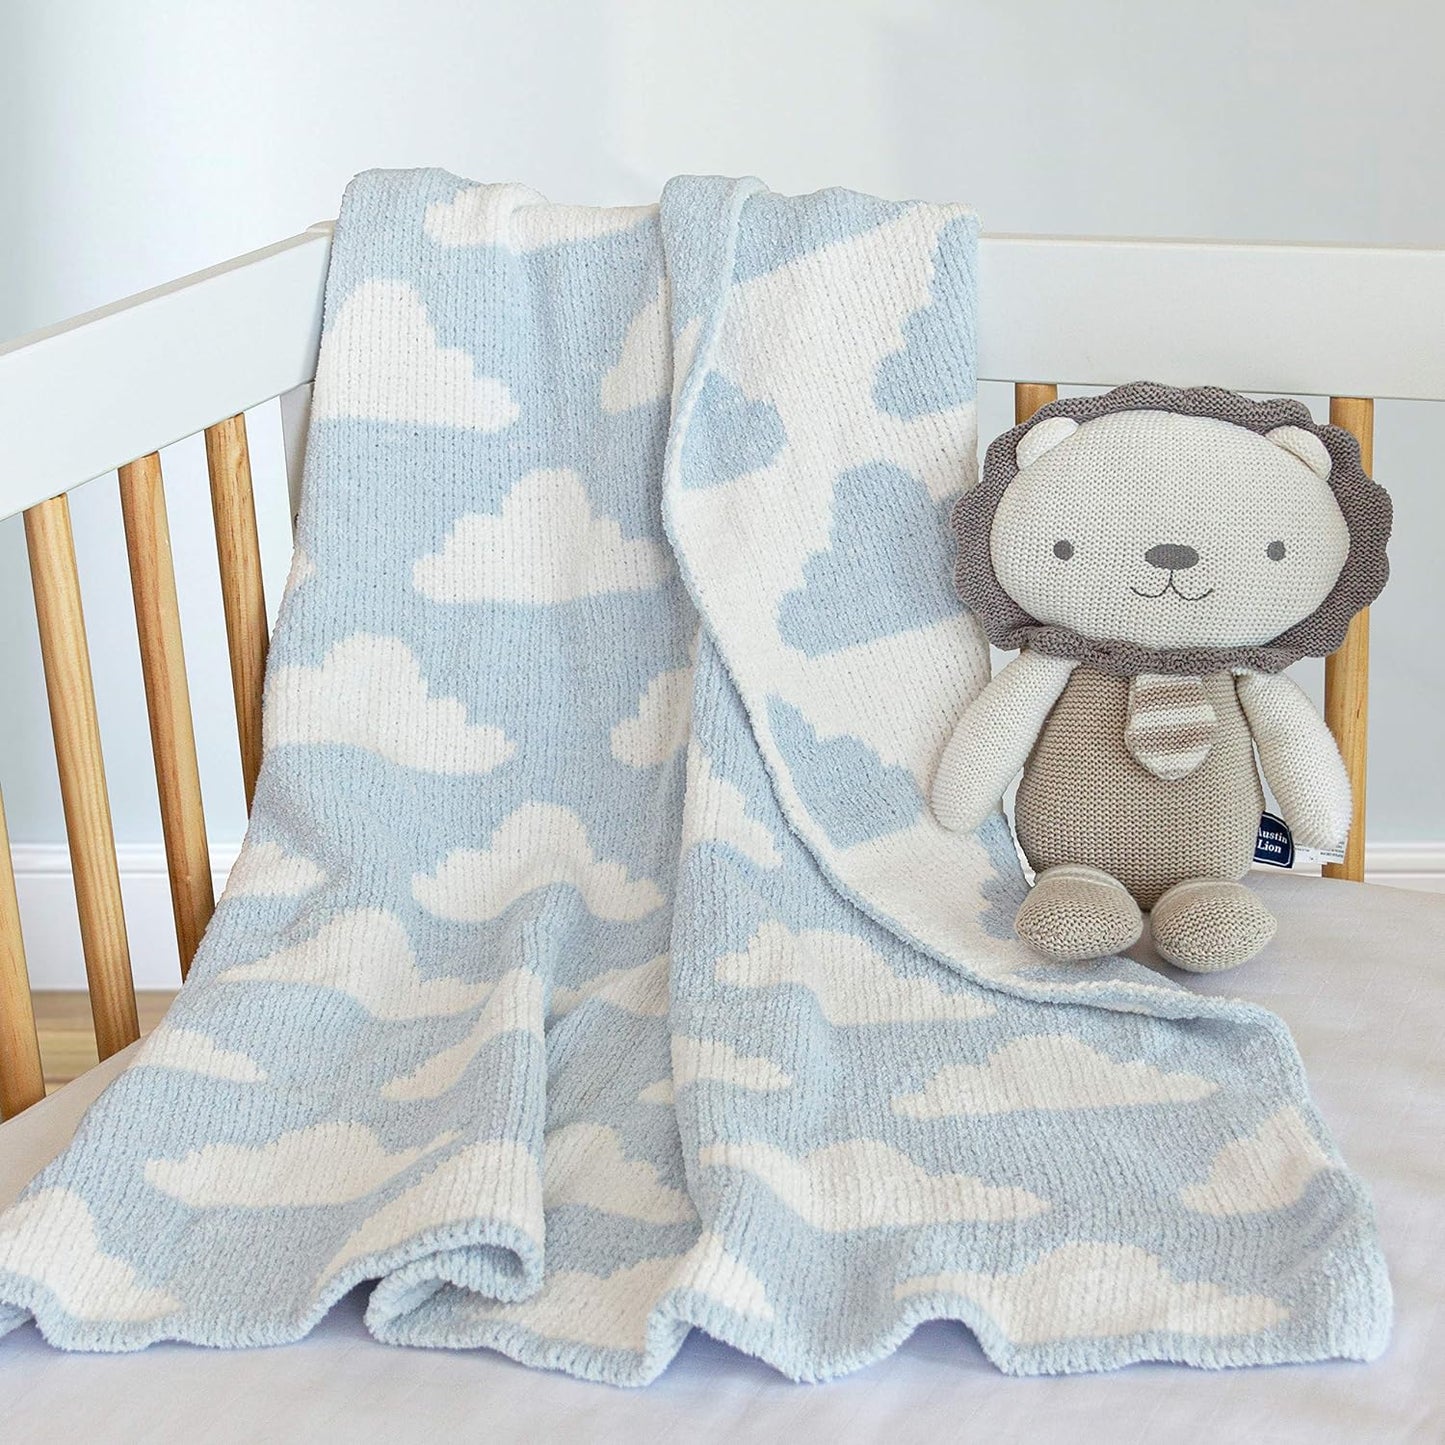 Living Textiles Blue Clouds Chenille Soft Baby Blanket Reversible Premium Cozy Fabric for Best Comfort - for Infant,Toddler,Newborn,Nursery,Boy,Unisex,Throw,Crib,Stroller,Gift, Blue Clouds 40x30